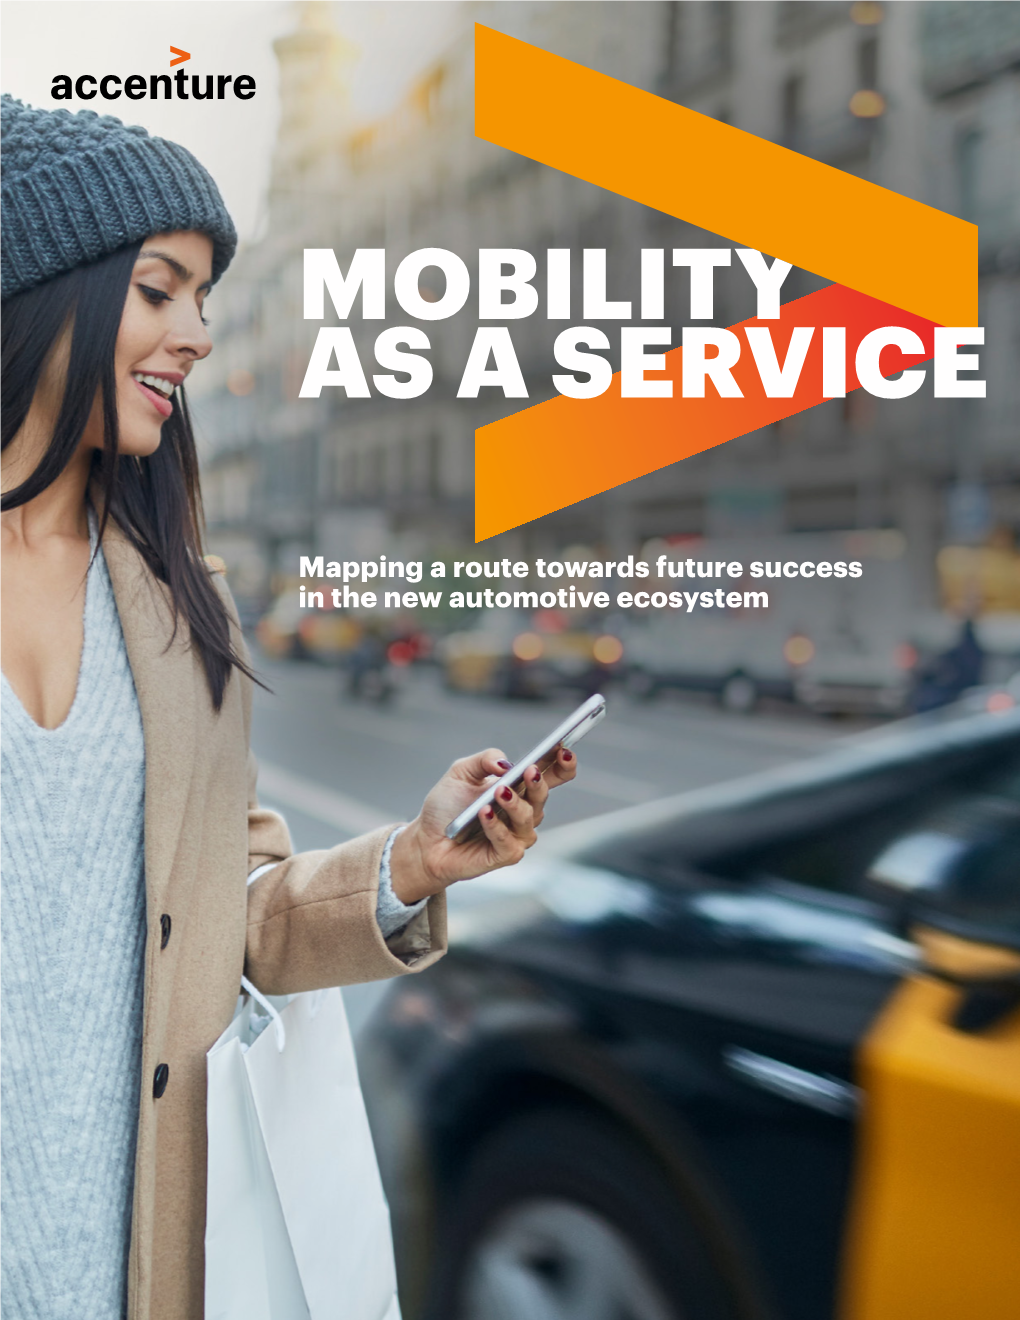 Mobility As a Service Is Accelerating in the Auto Industry